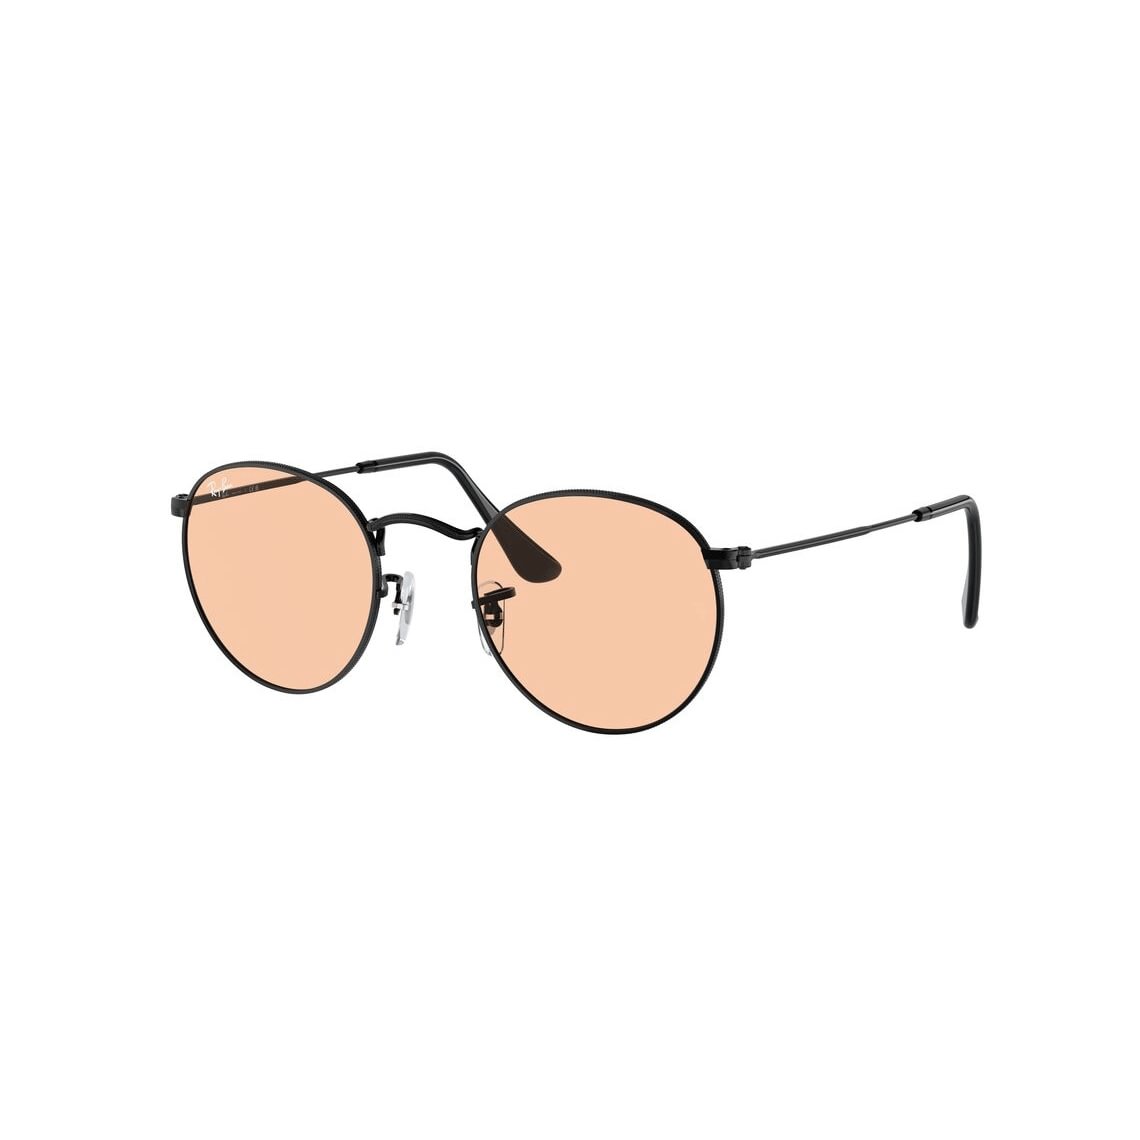 Ray-Ban Round Metal RB3447 002/4B 5021 - Synsam